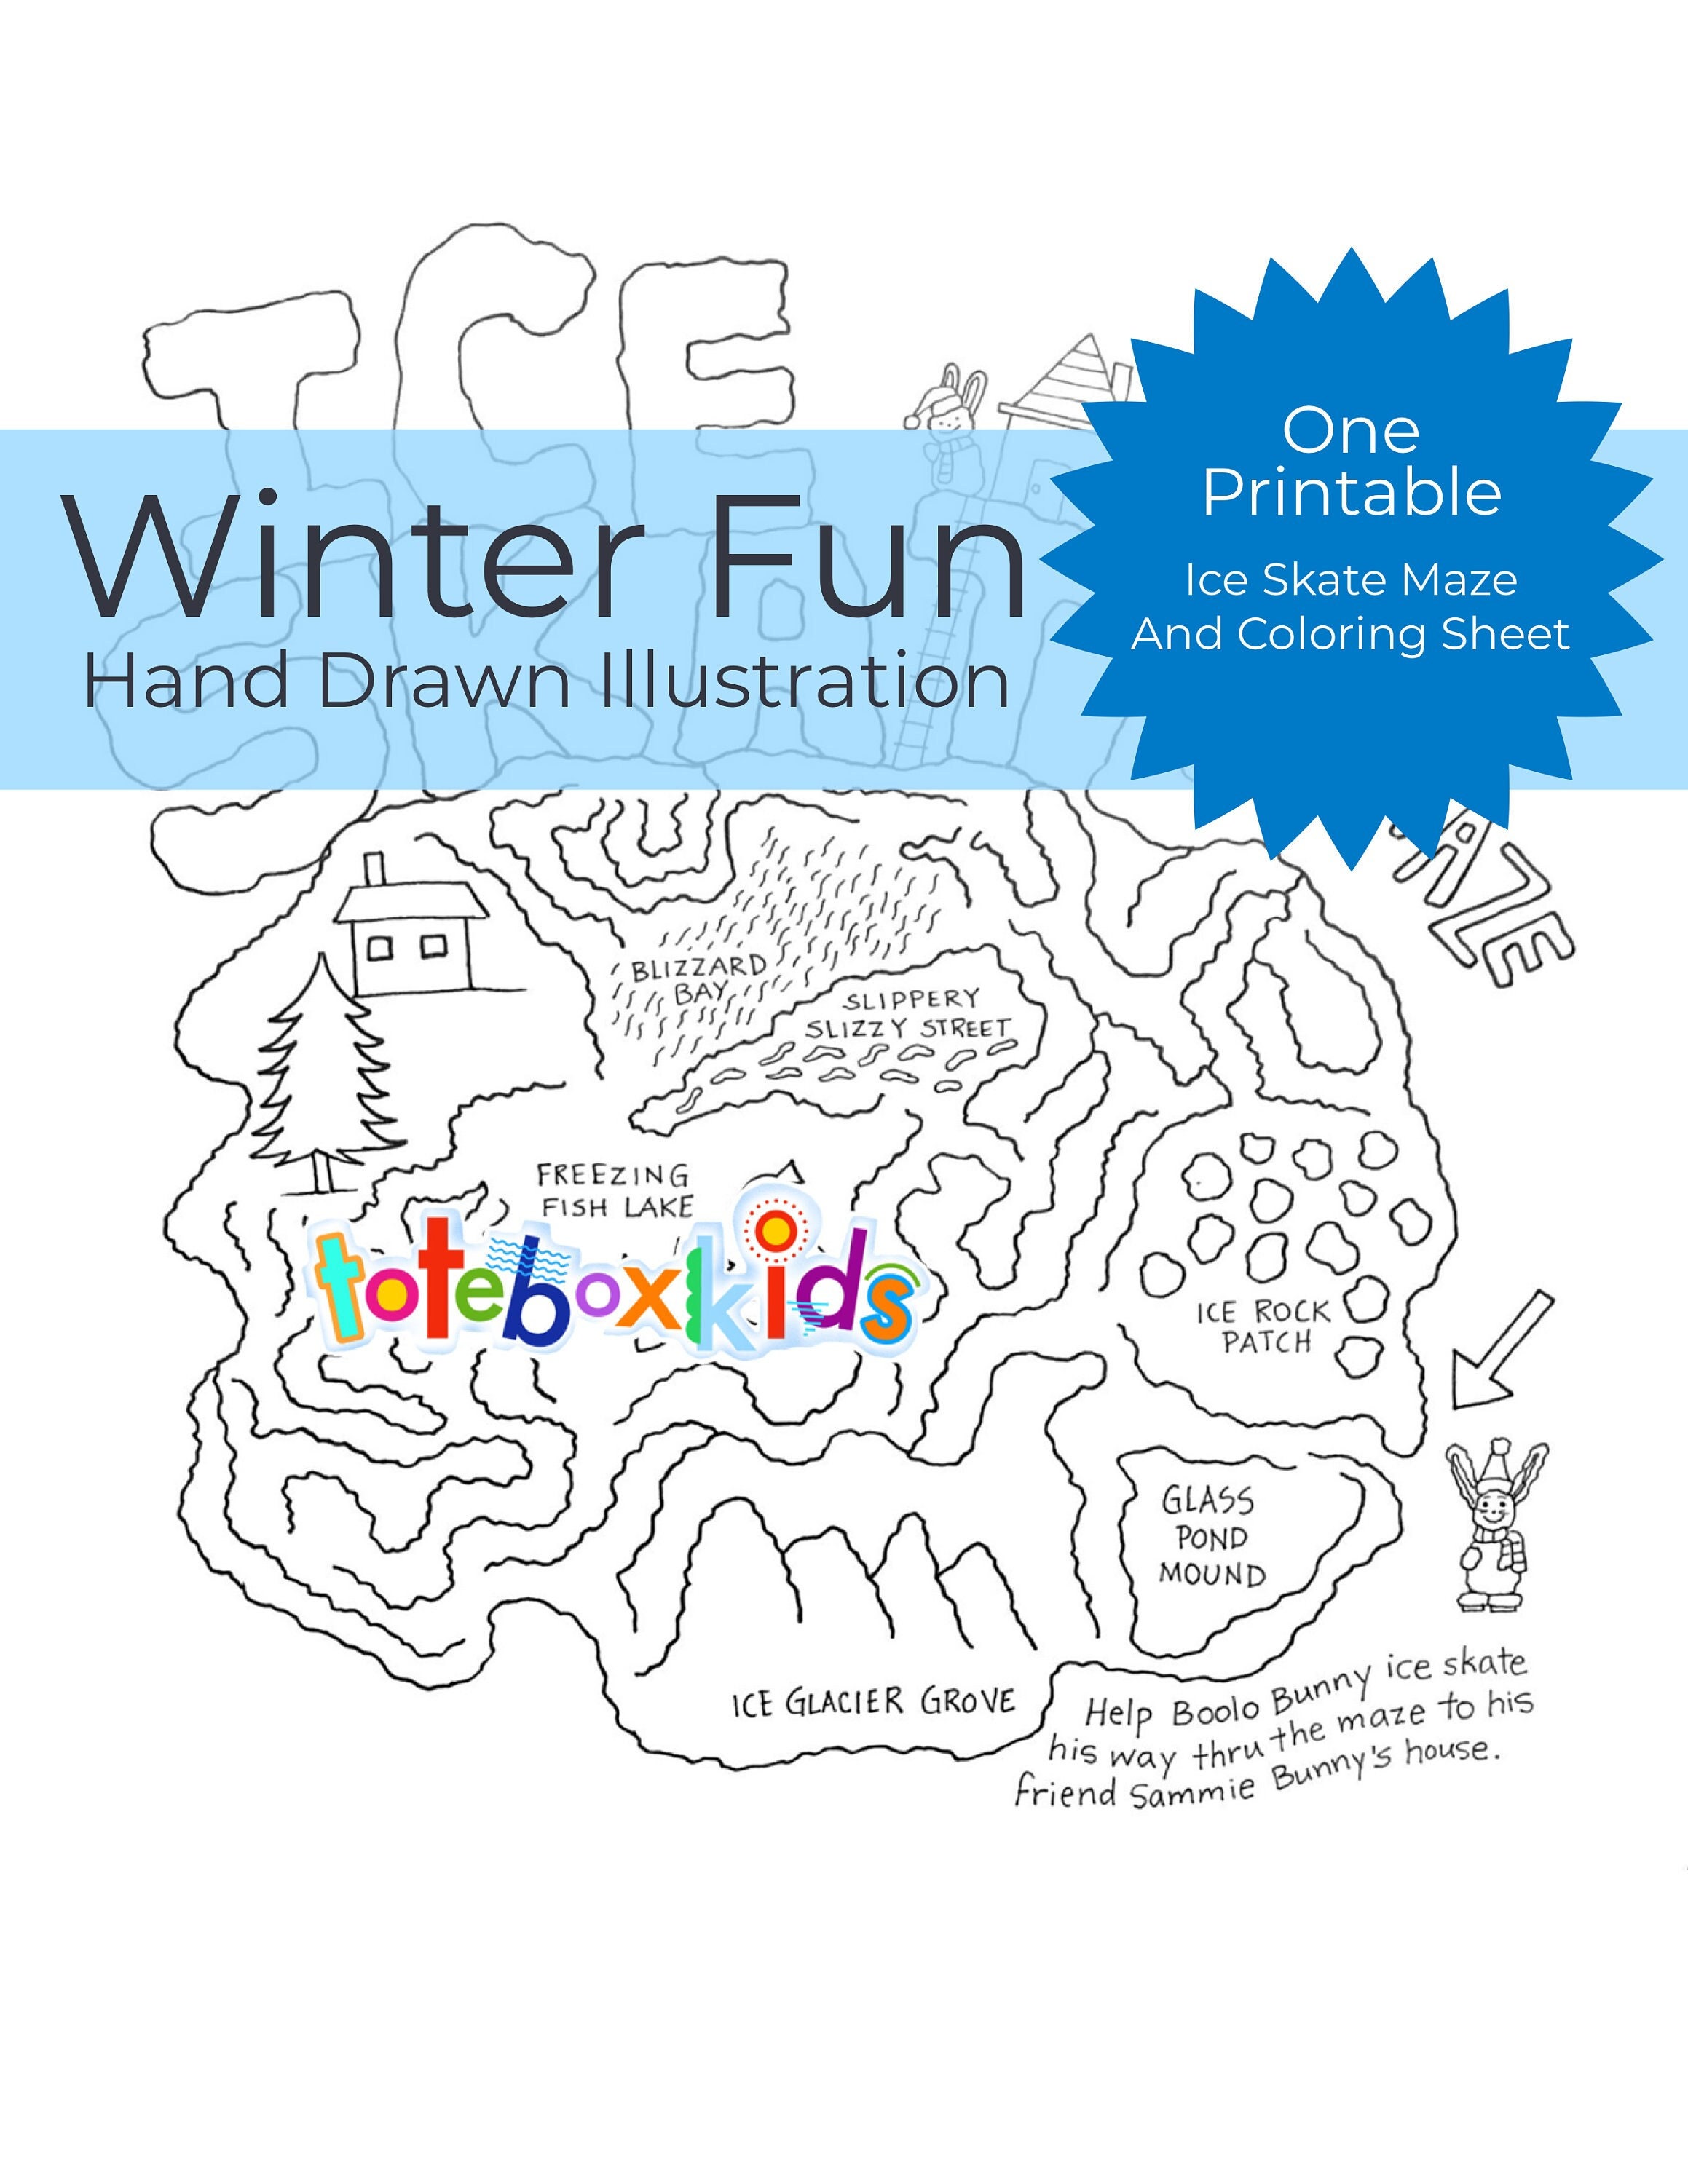 Ice skate maze and coloring sheet